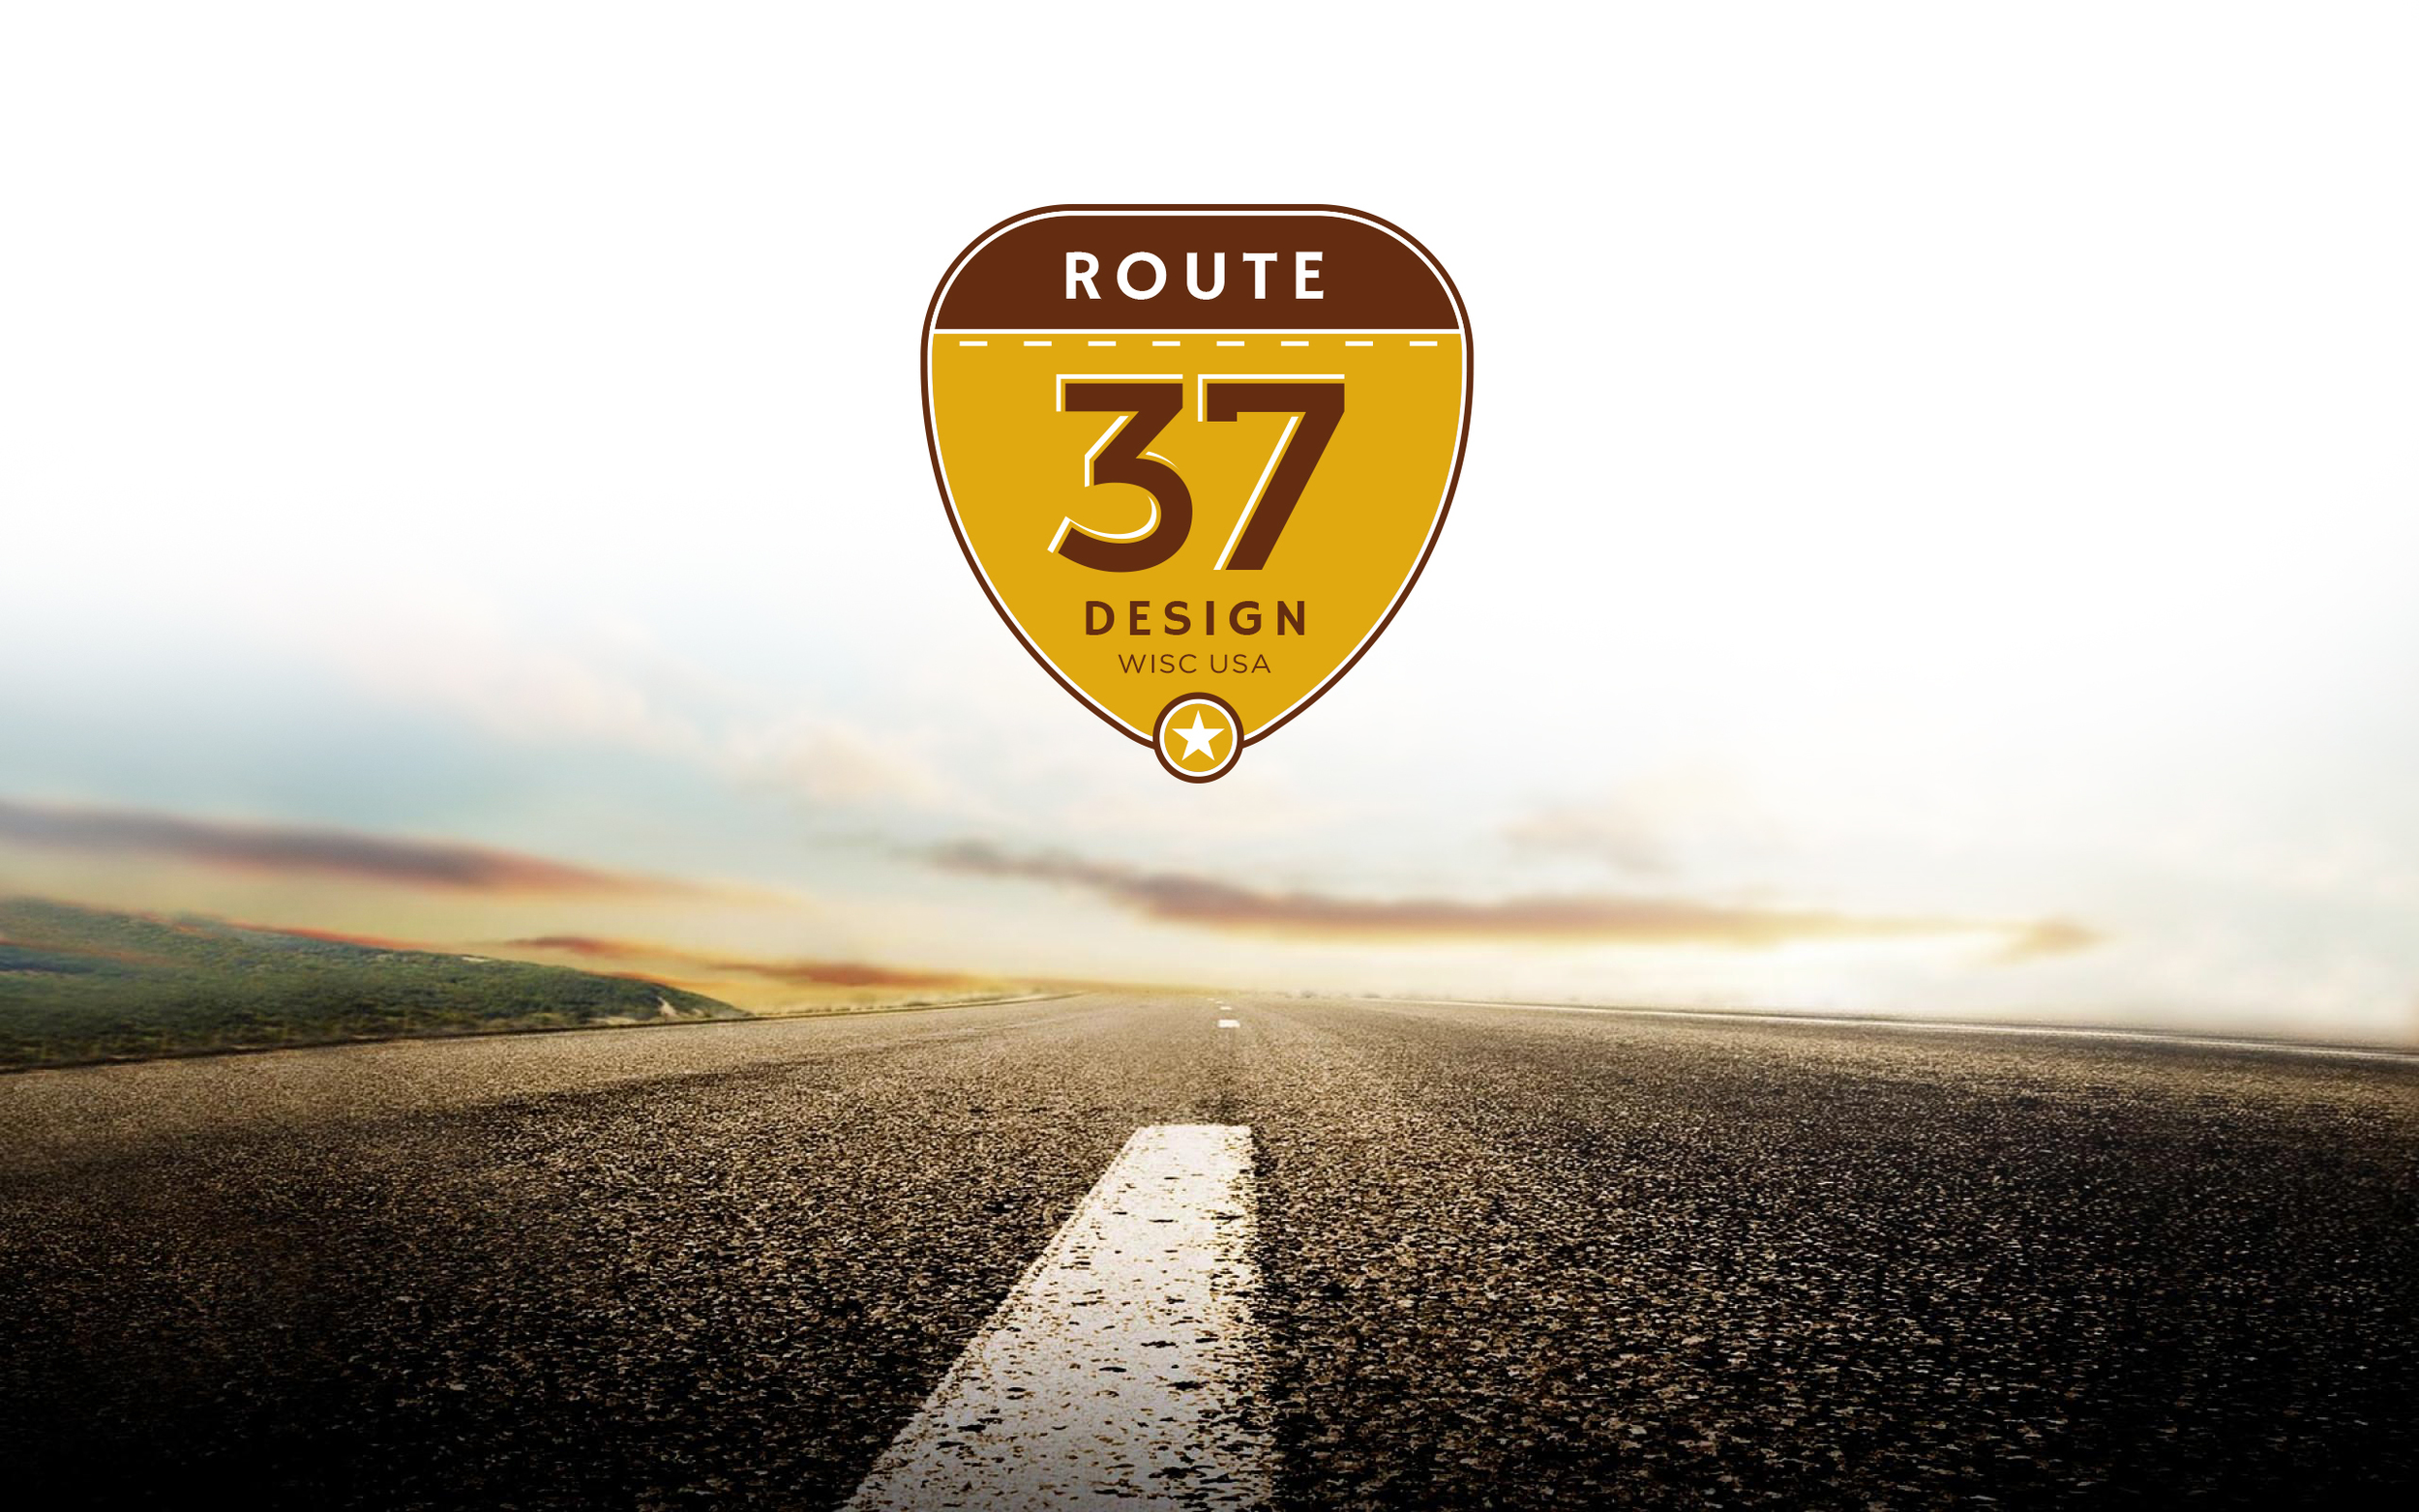 About The Route — Route 37 Design